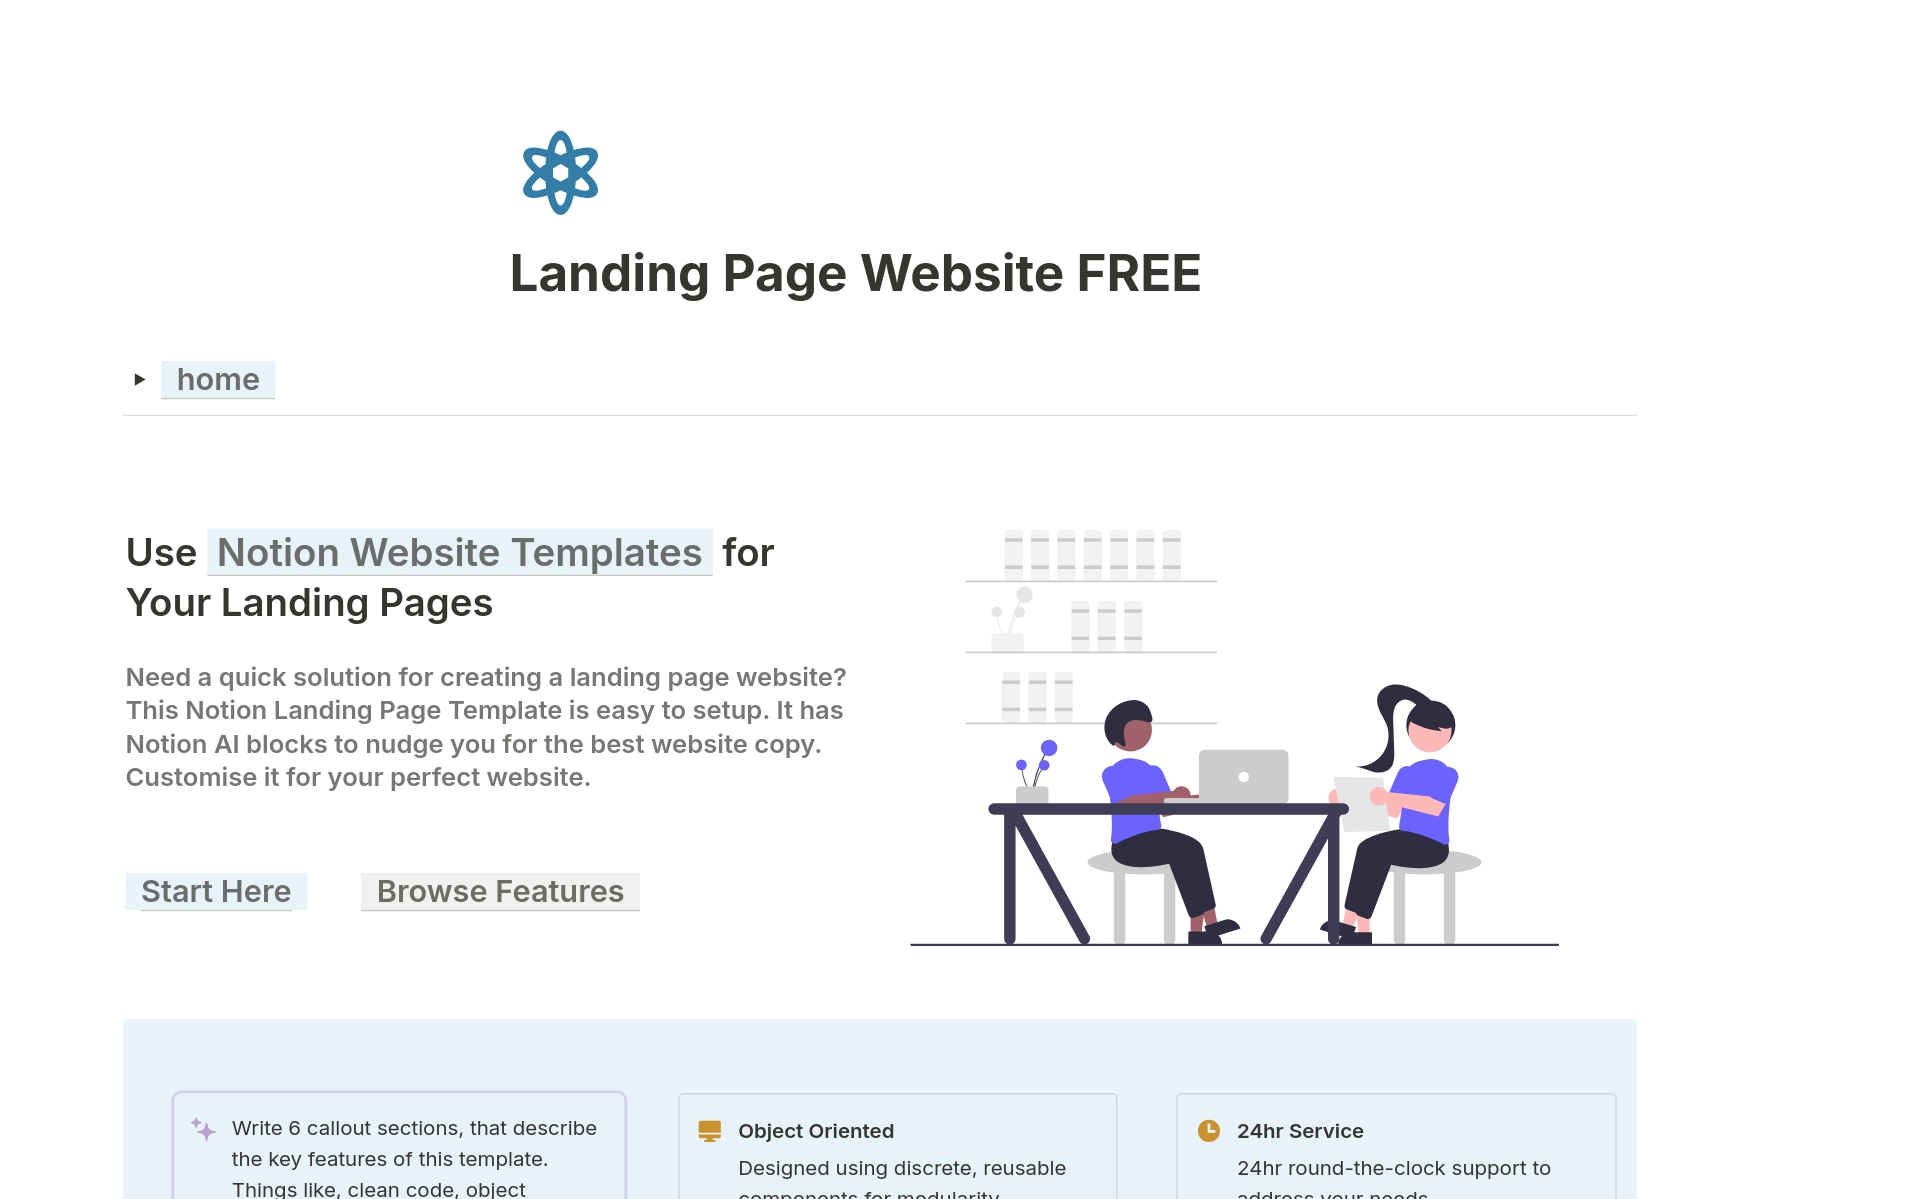 FREE Notion Landing Page Website Template, to quickly and easily setup your own Notion powered landing page, product page or personal website. Using Notion Websites and Notion AI this template will give you an easy to customise professional website.